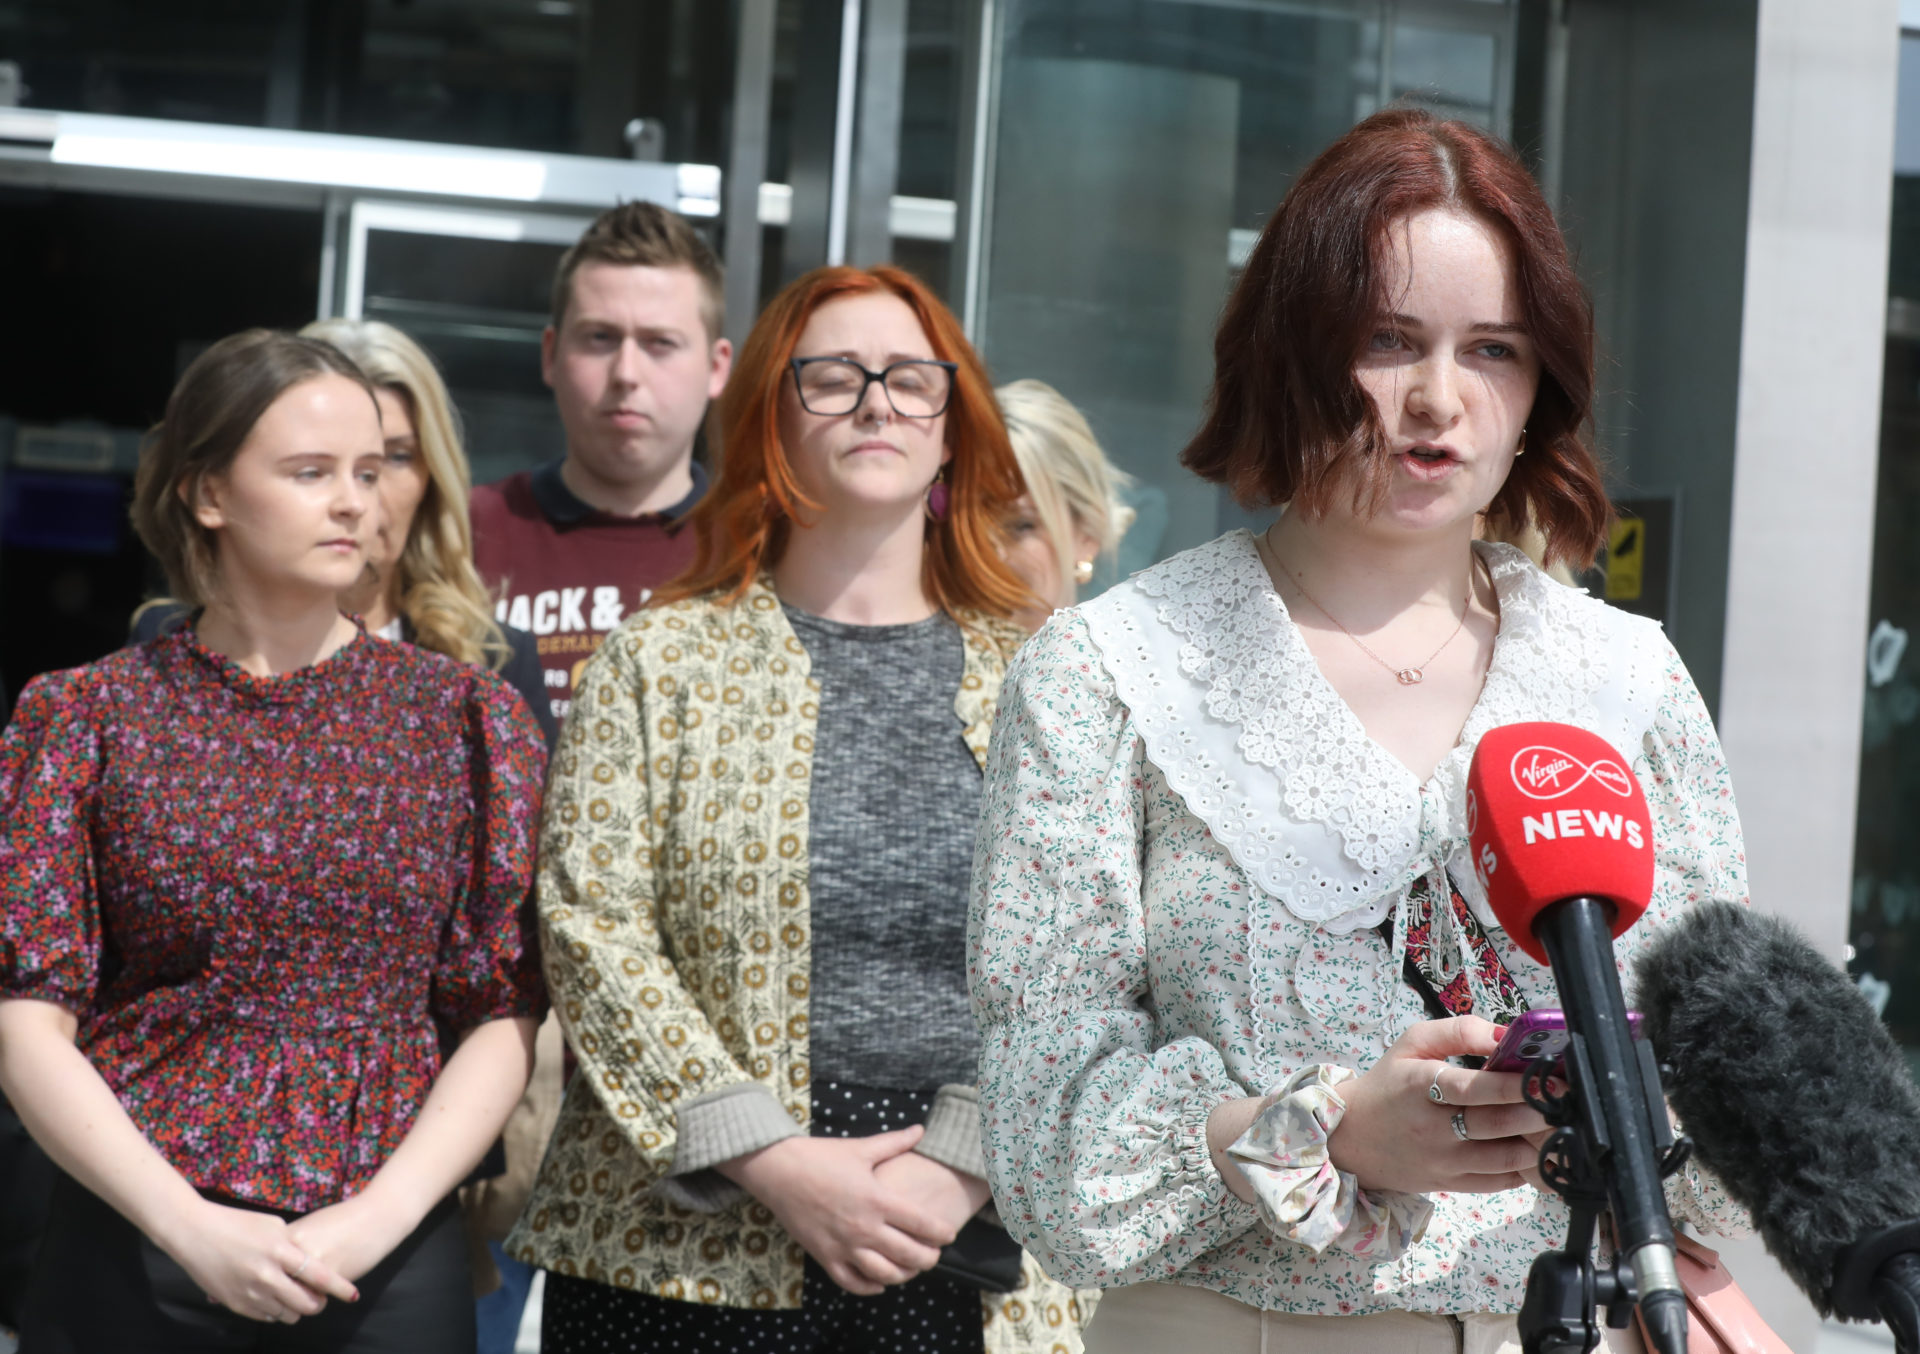 Karen Harkin speaks outside the Criminal Courts of Justice after her father Michael Carter was sentenced to 10-and-a-half years in prison